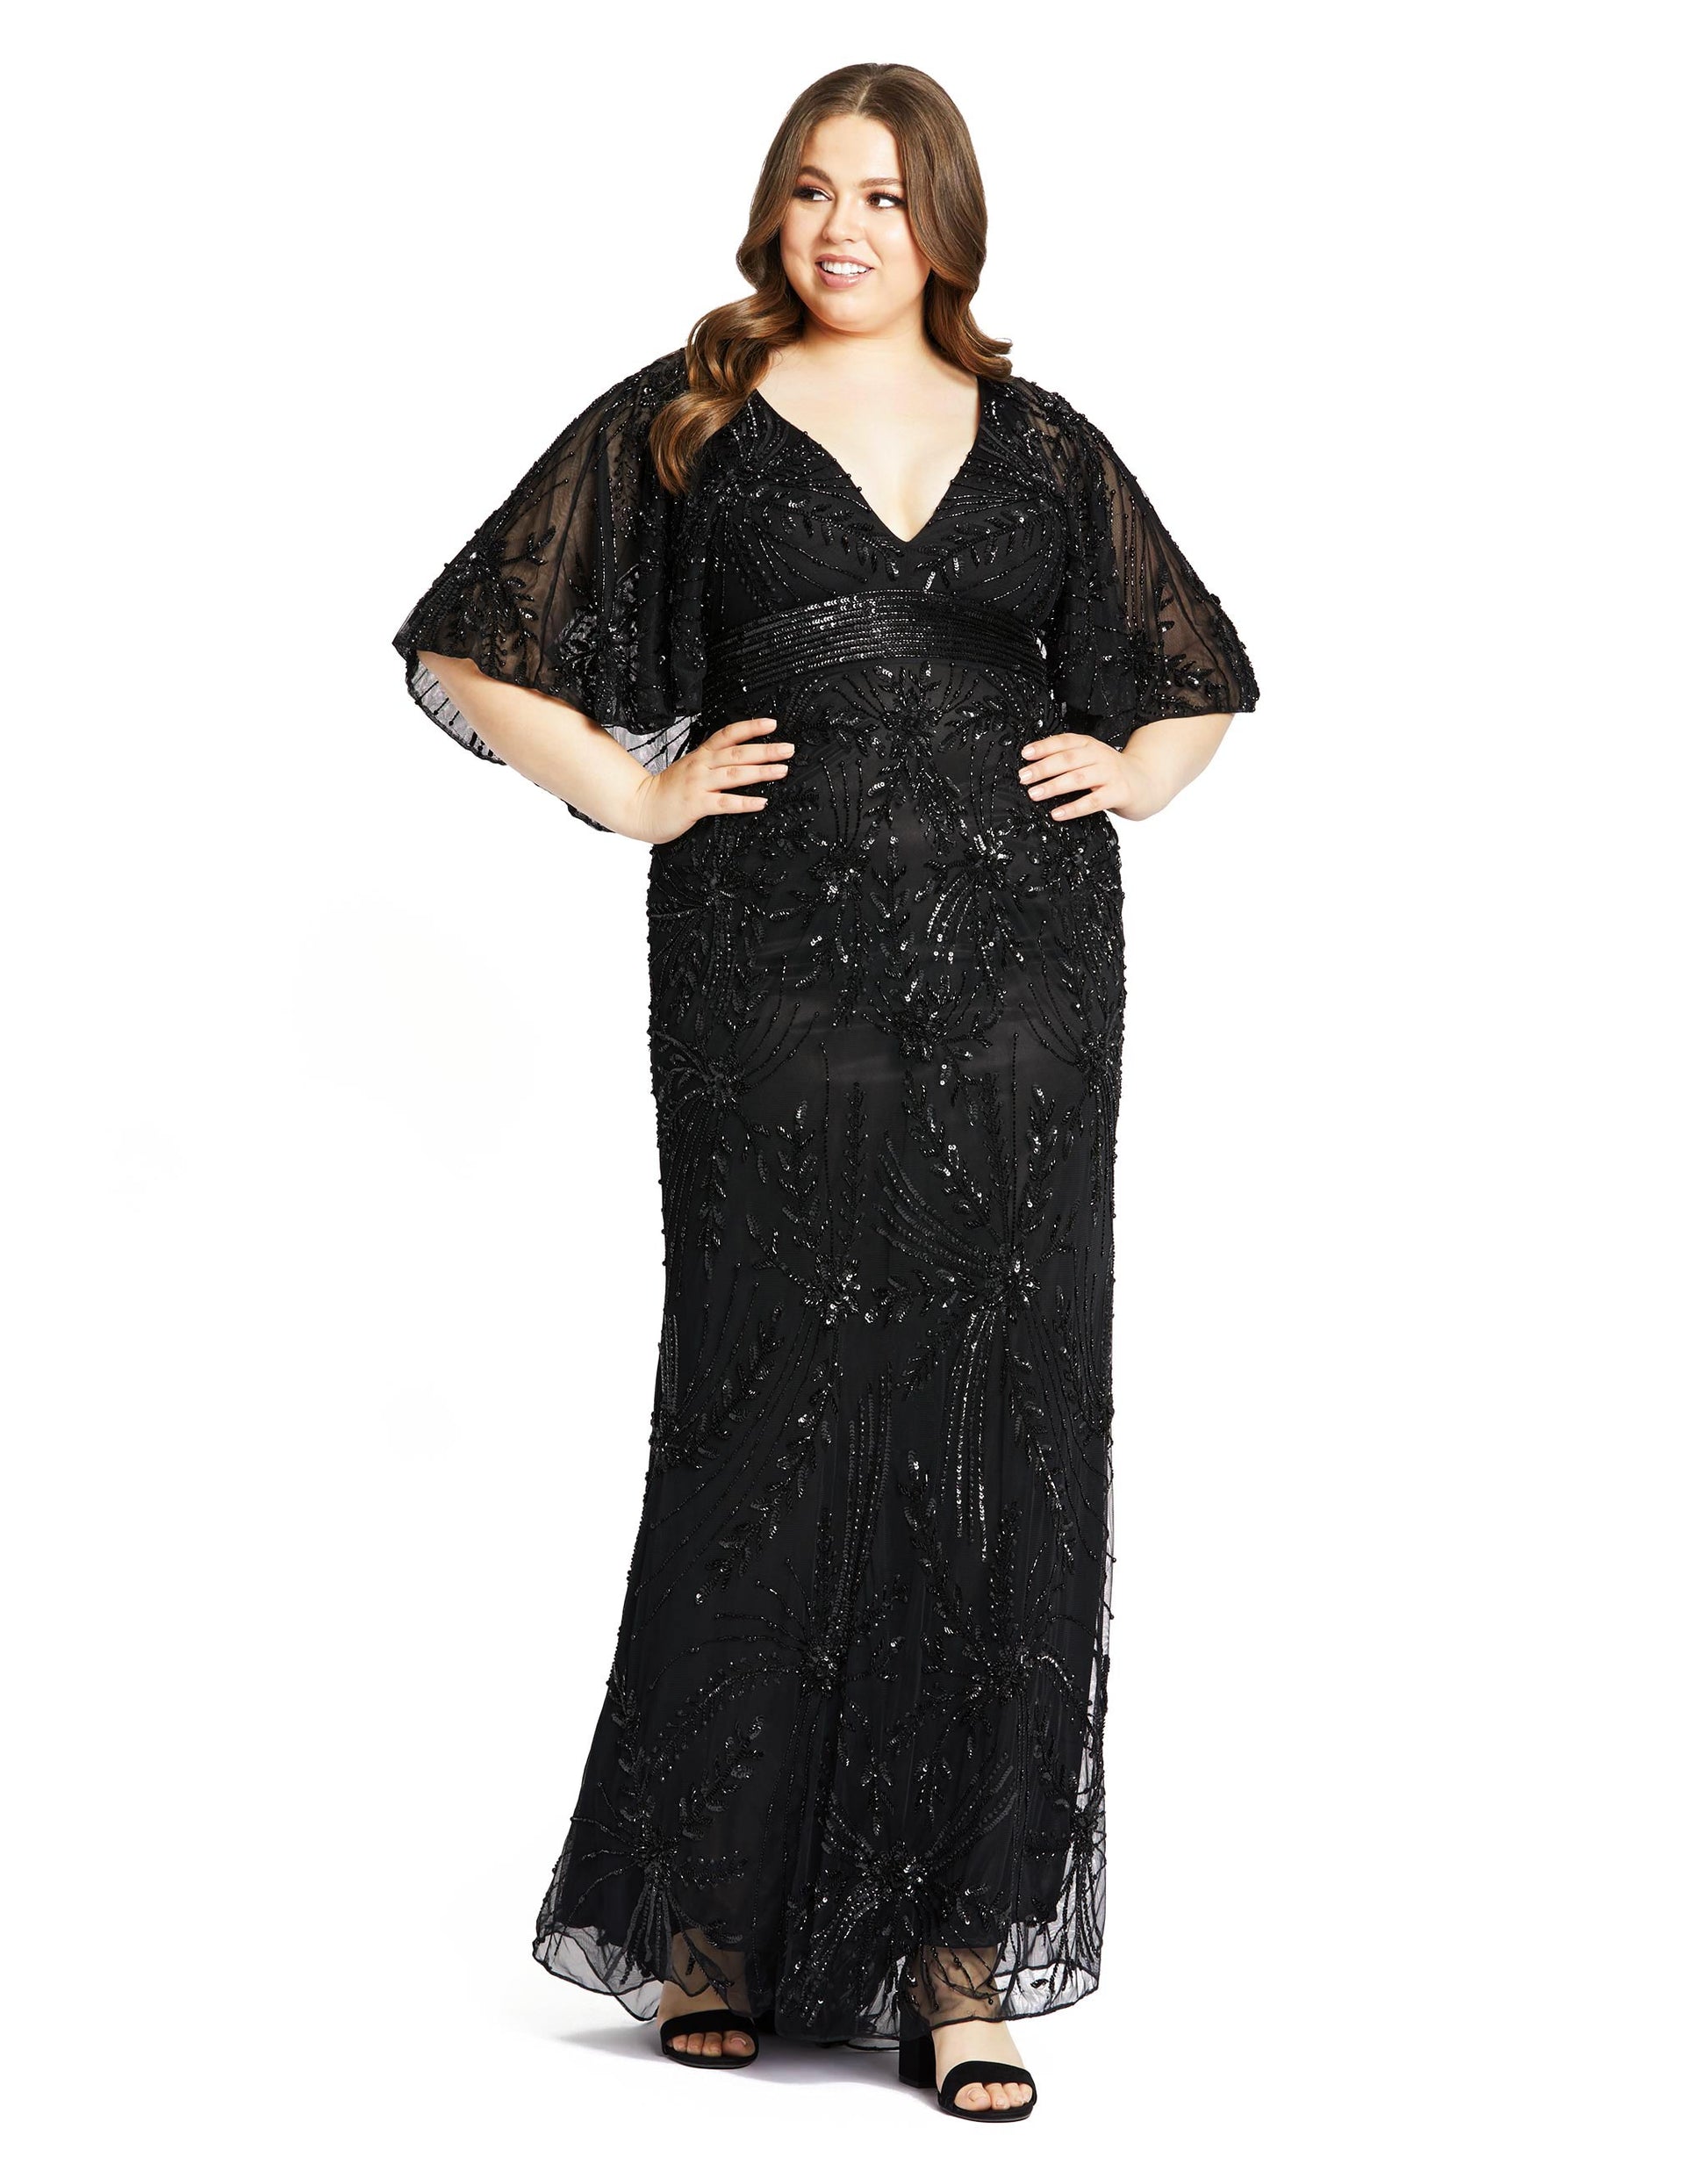 Vintage-inspired evening gown with flounce sleeves, intricate sequin detailing and sequined empire waist. Mac Duggal Fully Lined Back Zipper 100% Polyester Short Sleeve Full Length Plunging Neckline Style #5335